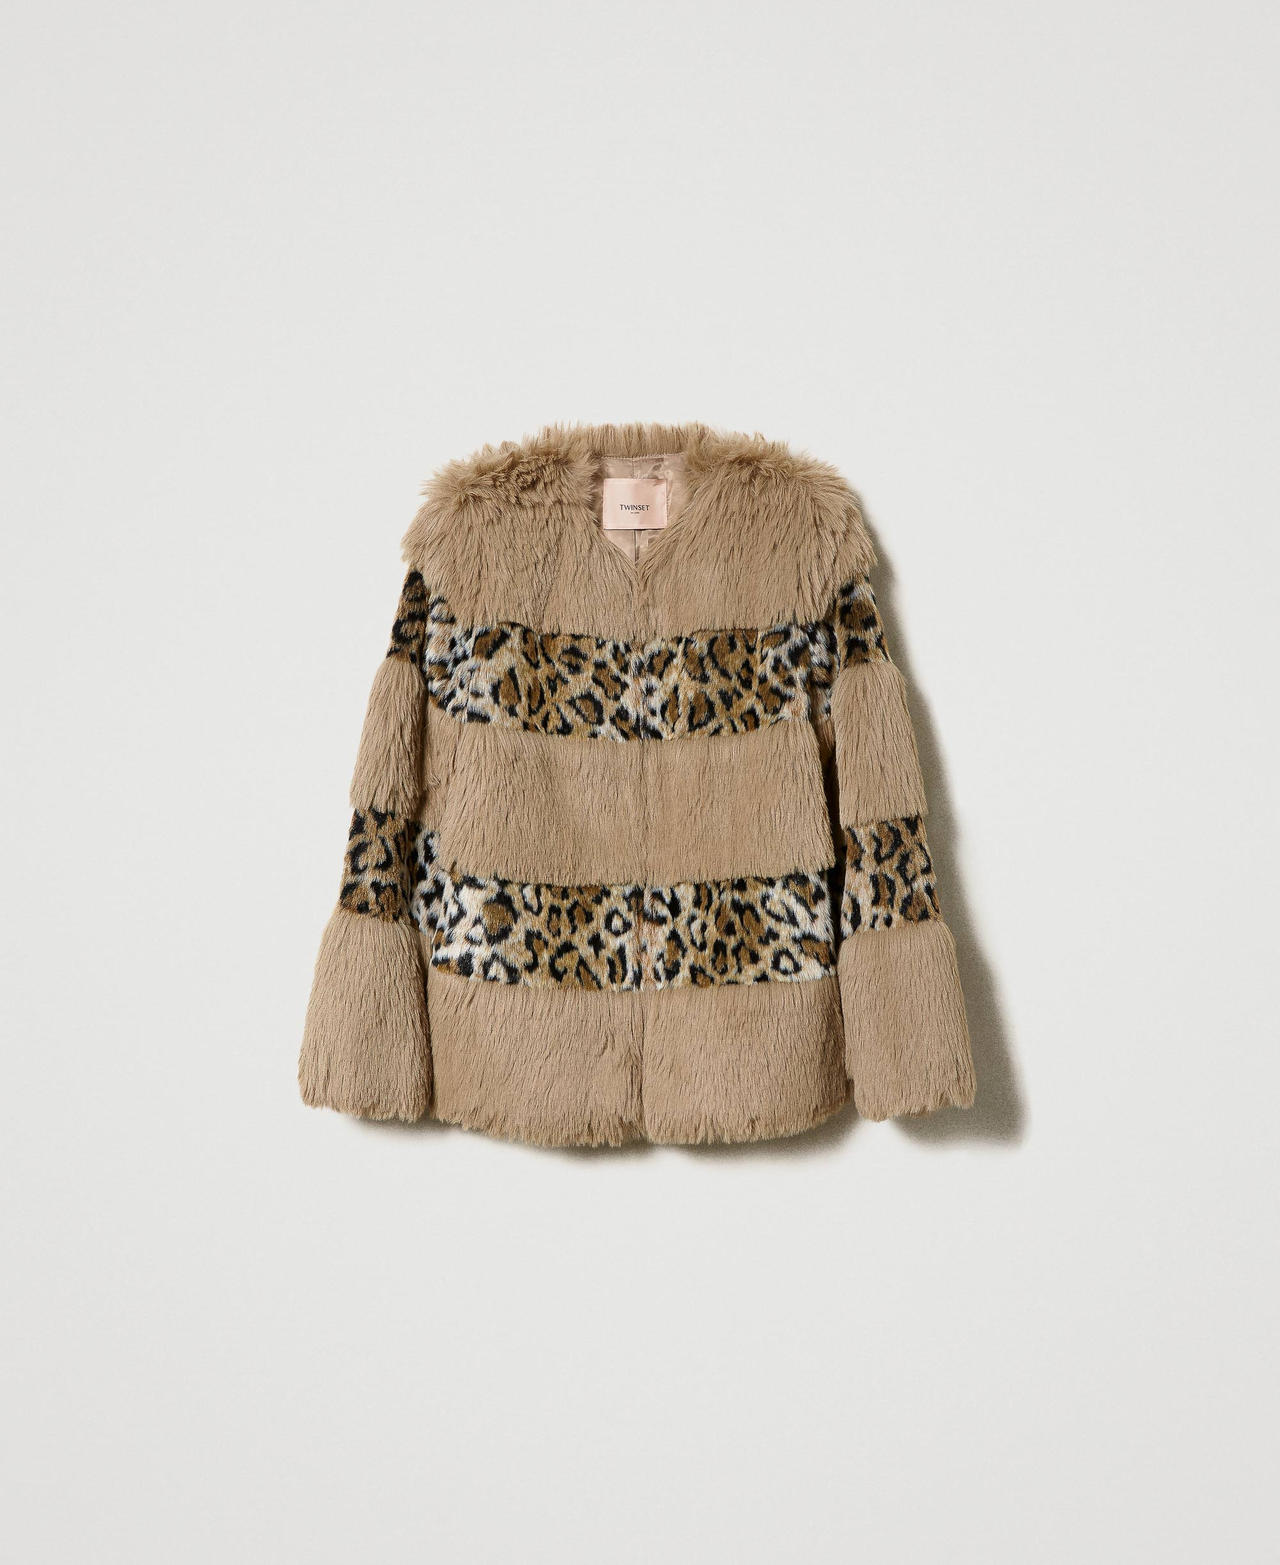 Giacca in faux fur con righe animalier Patch Animalier / Marrone "Iced Coffee" Donna 232TP2290-0S